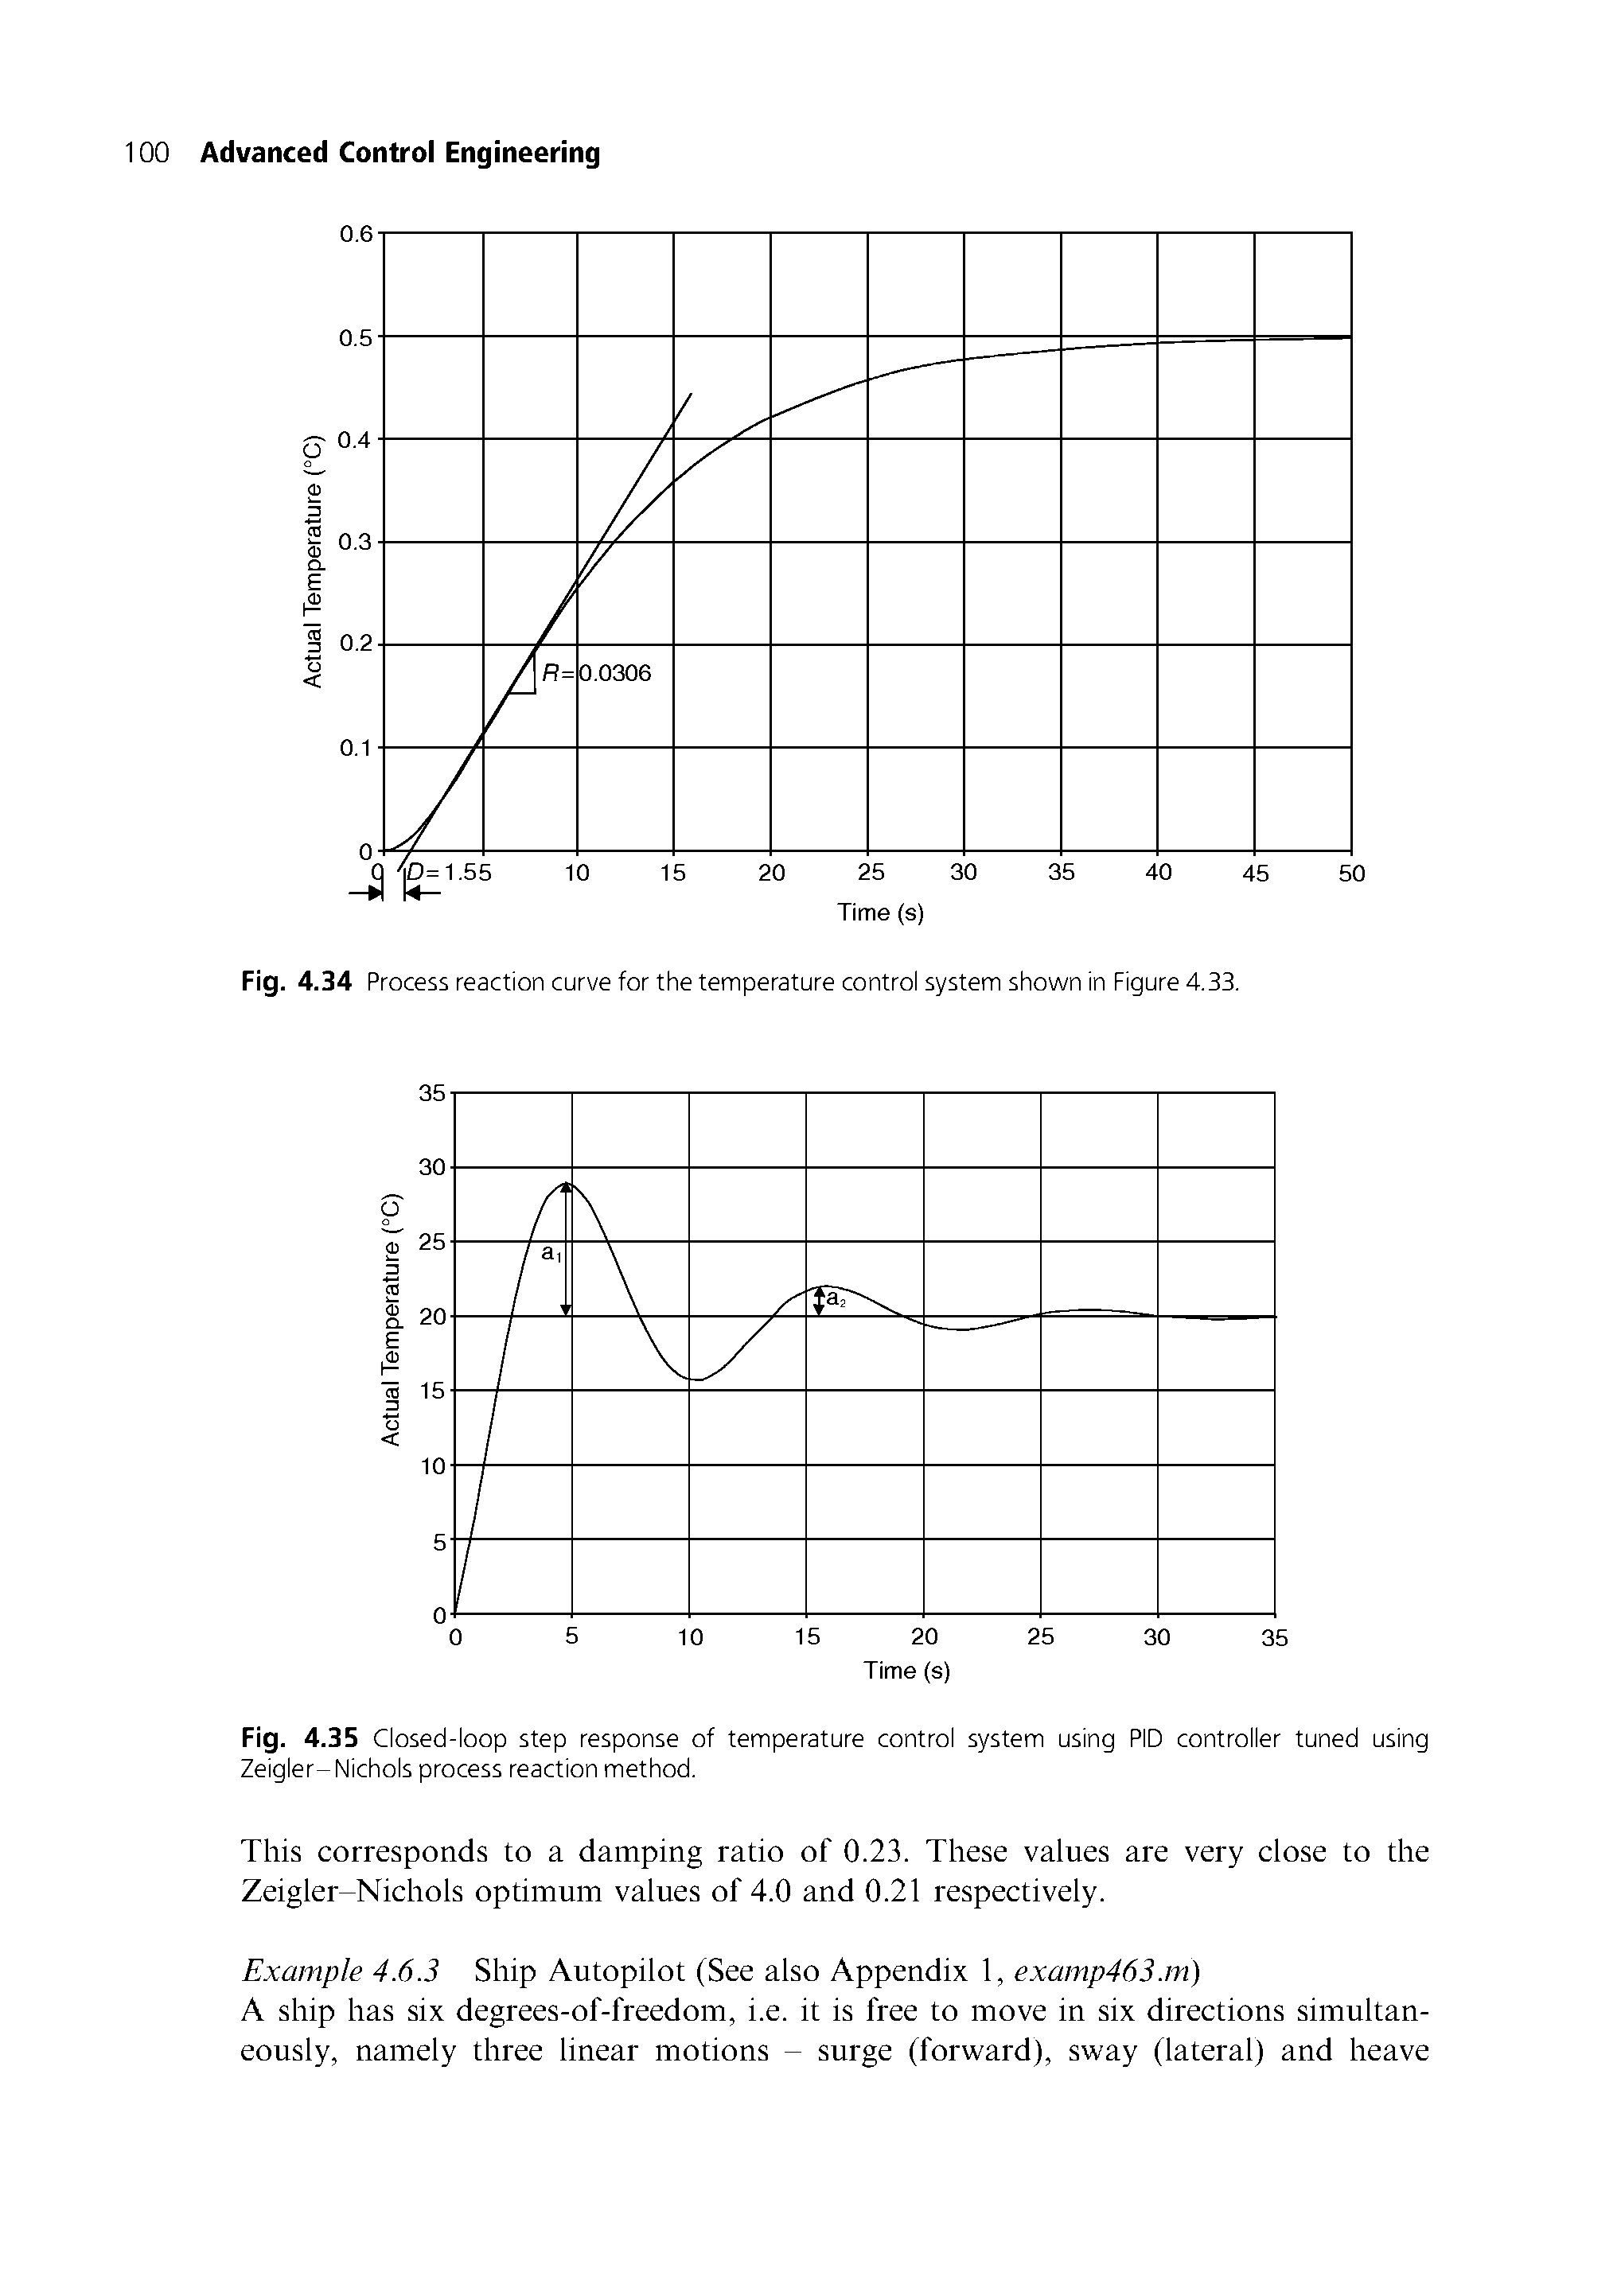 Fig. 4.34 Process reaction curve for the temperature control system shown in Figure 4.33.